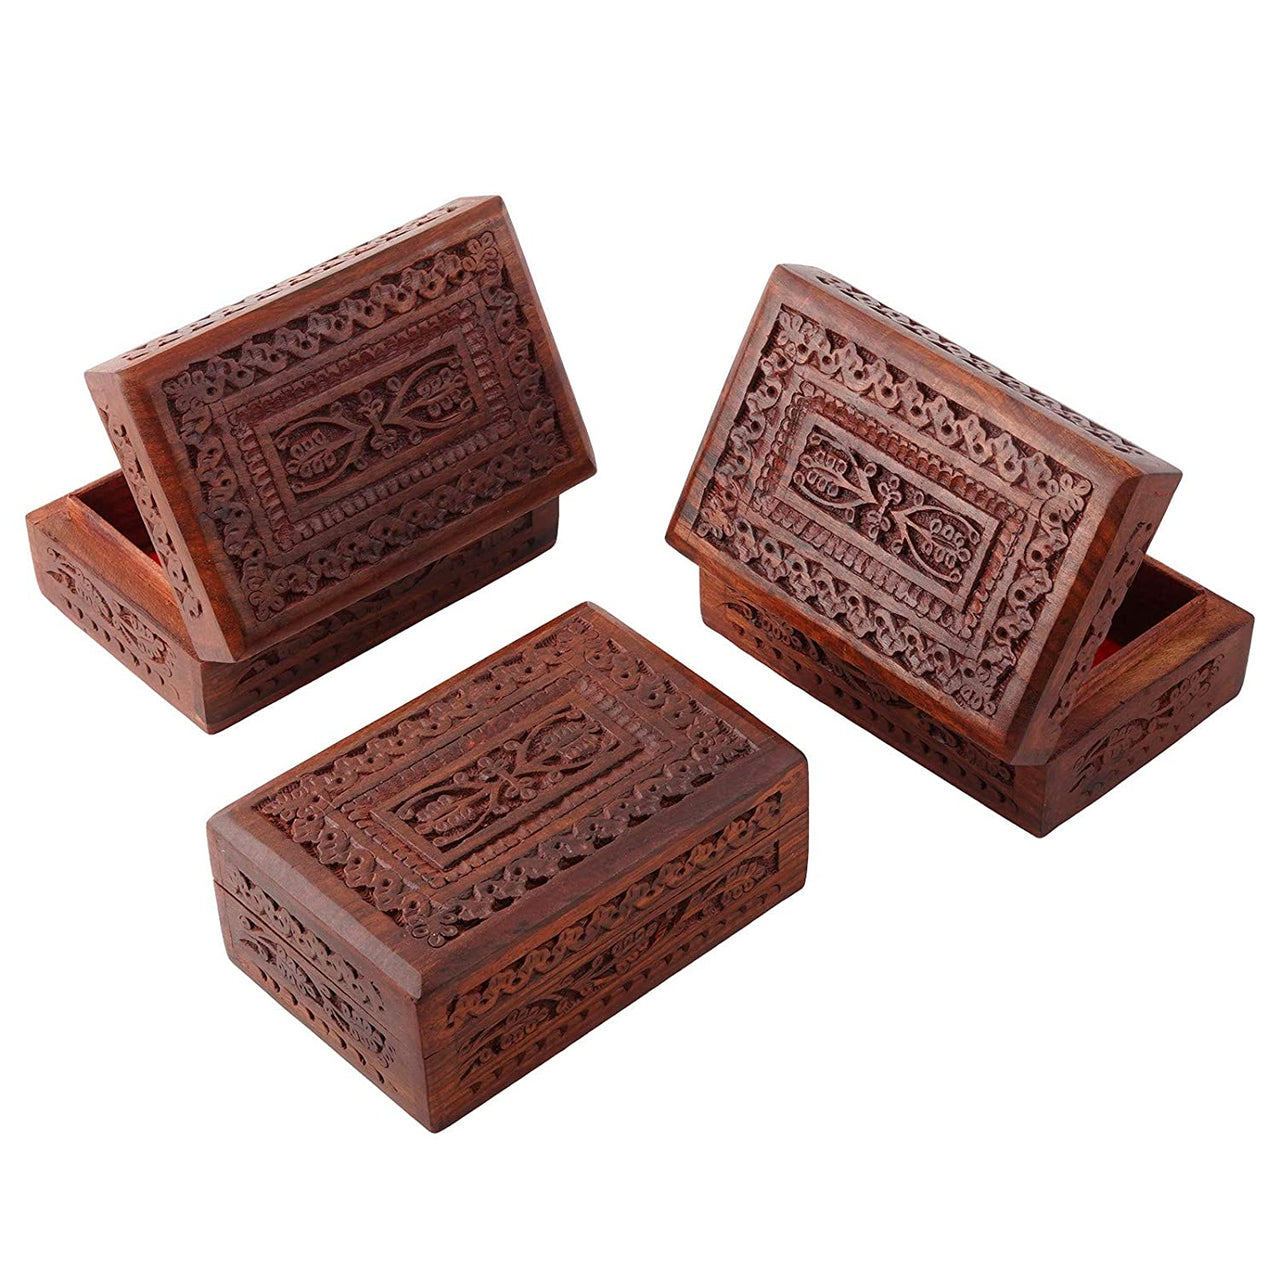 Handmade Wooden Jewellery Box for Women Jewel Organizer Hand Carved with Intricate Carvings Gift Items Dime Store